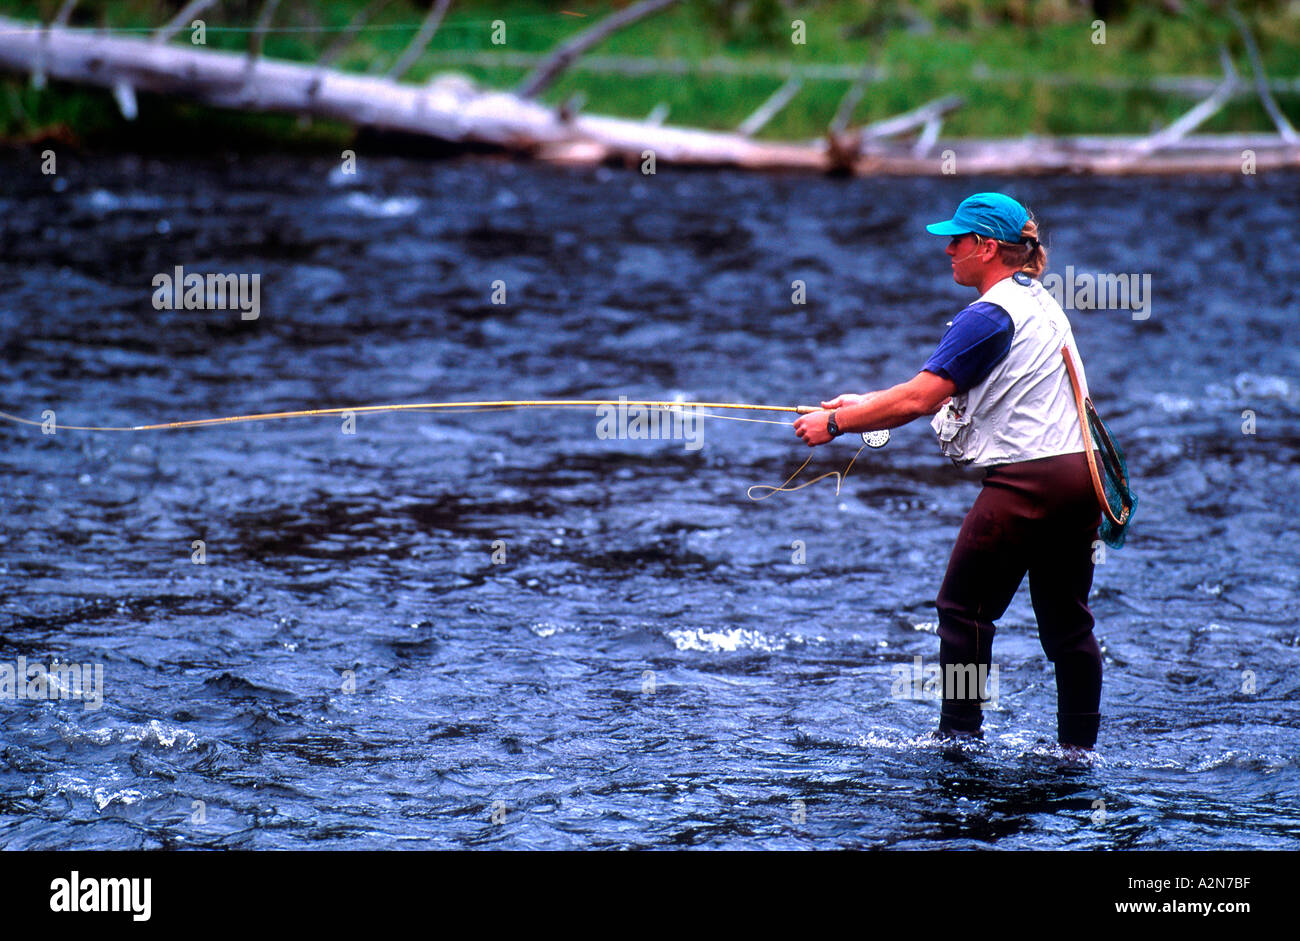 https://c8.alamy.com/comp/A2N7BF/woman-fly-fishing-river-in-waders-and-fishing-vest-usa-A2N7BF.jpg